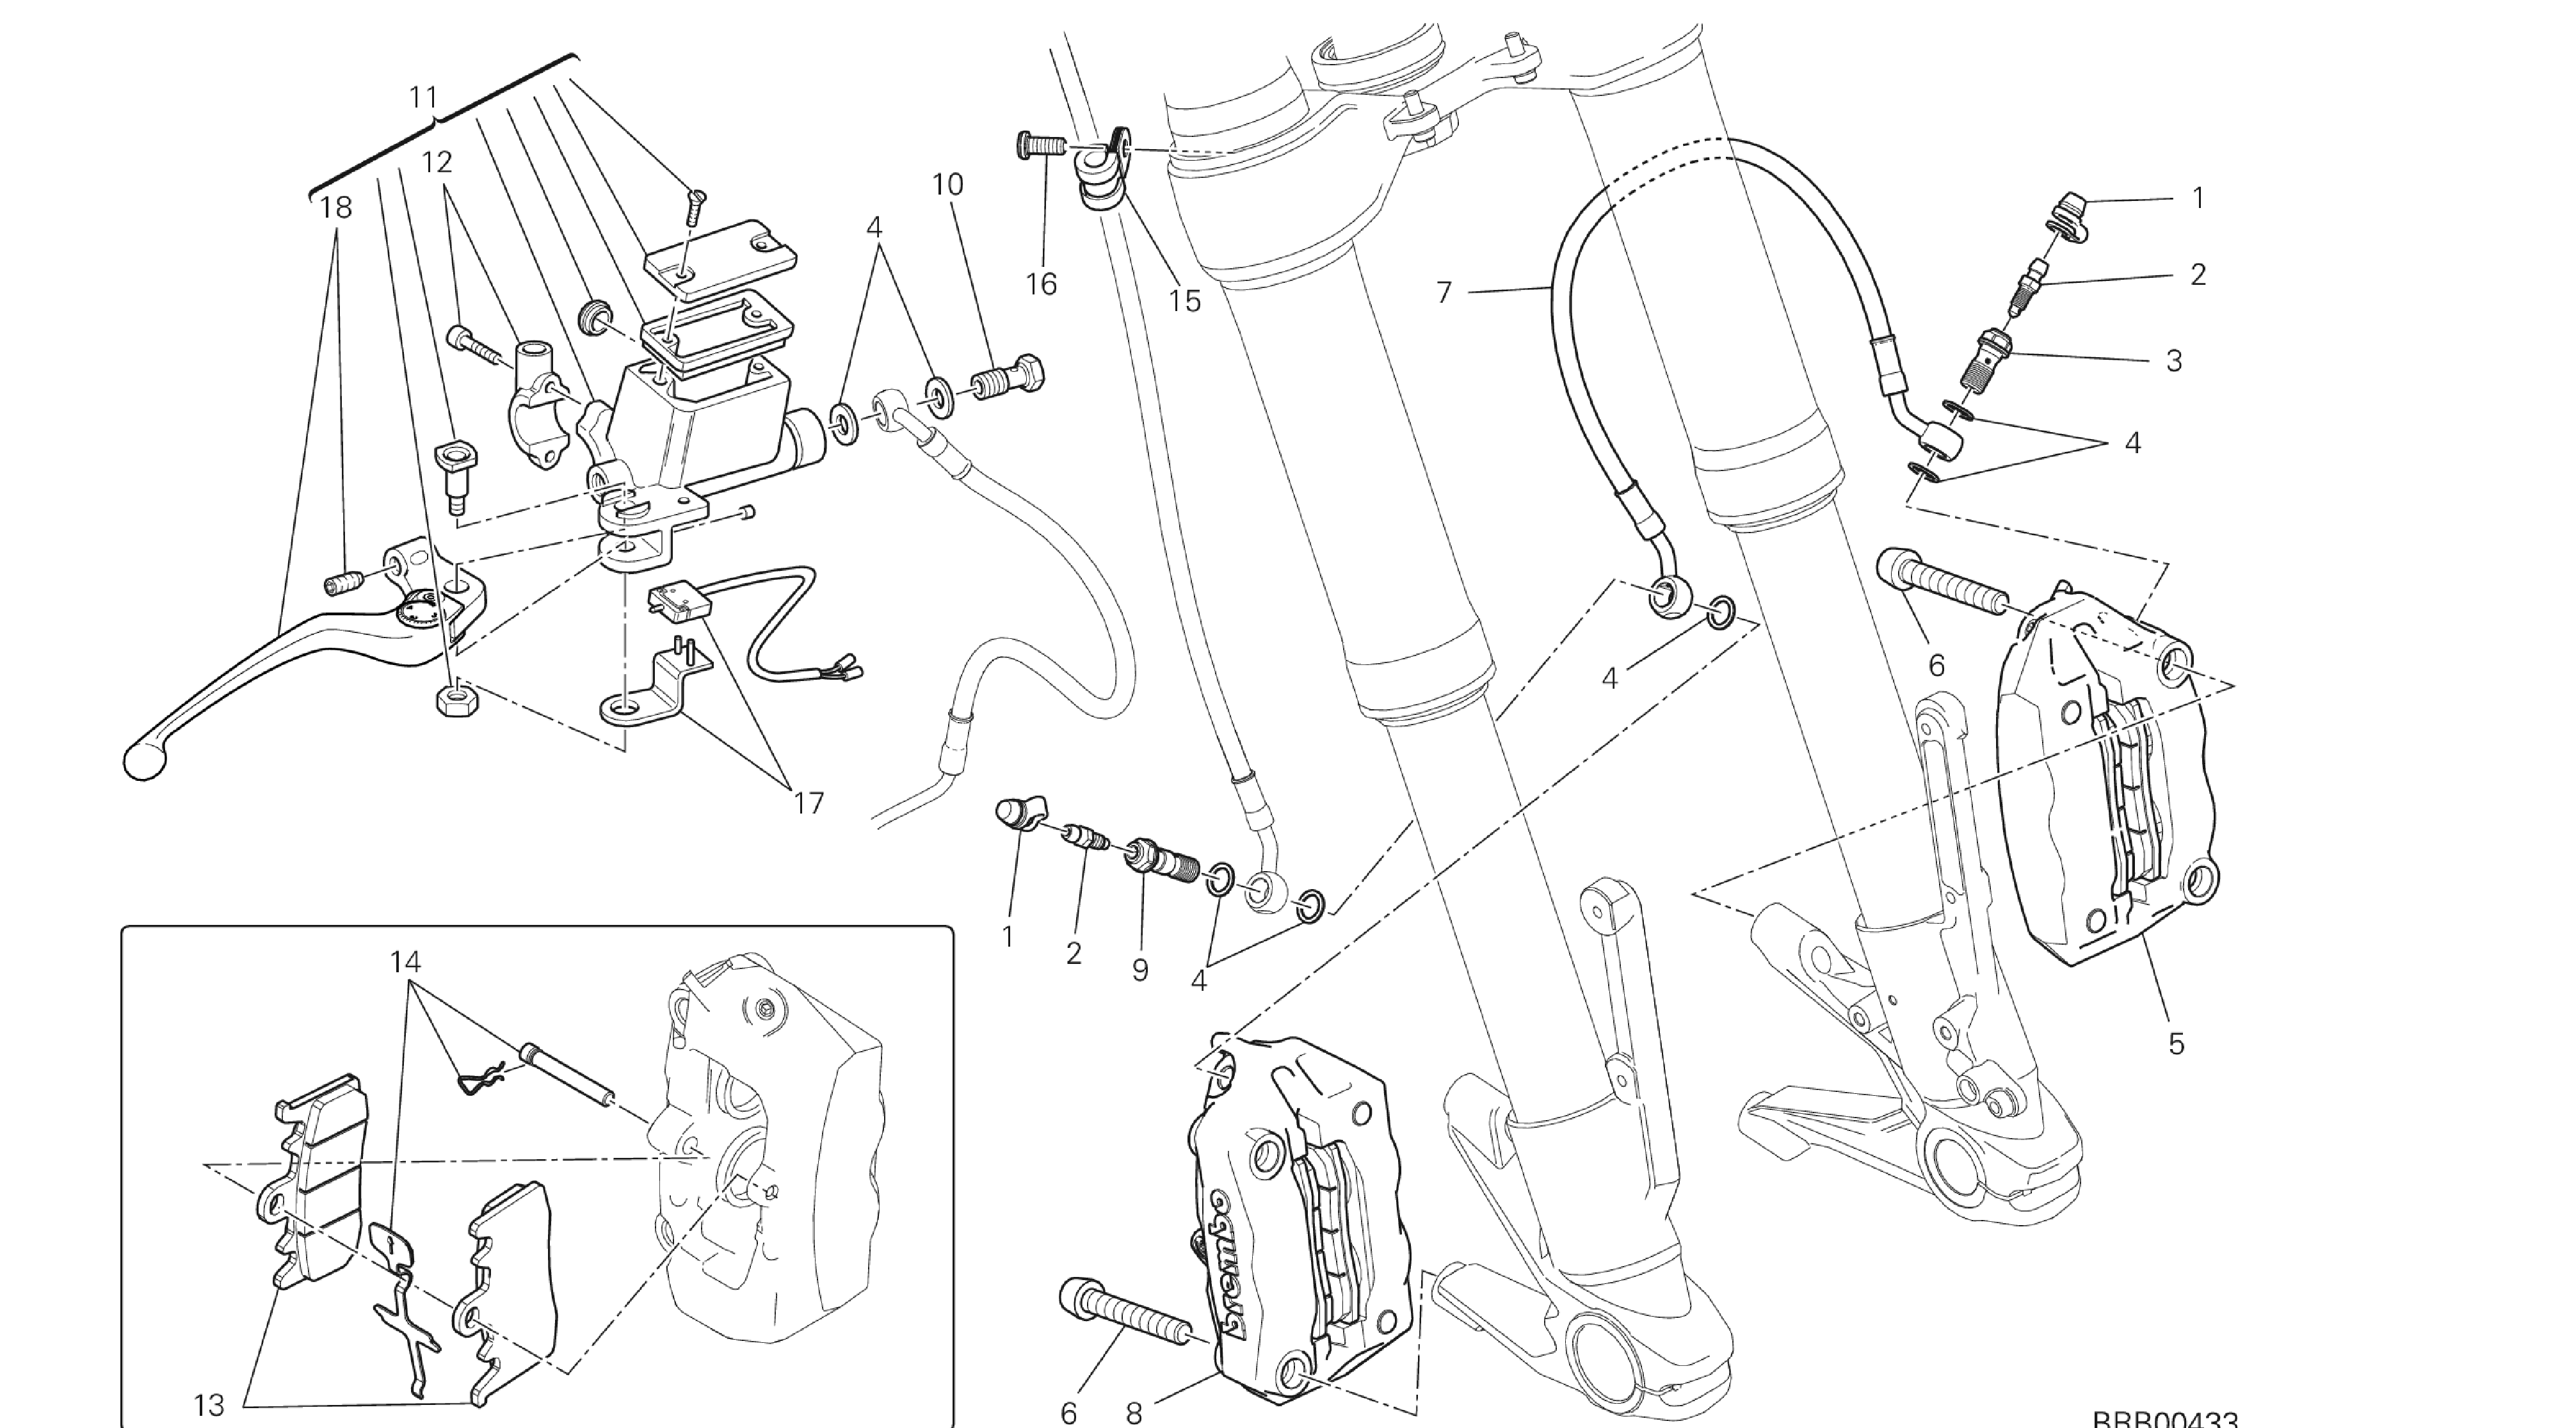 DRAWING 024 - FRONT BRAKE SYSTEM [X ST:CAL,C DN,EUR] GROUP FR AME